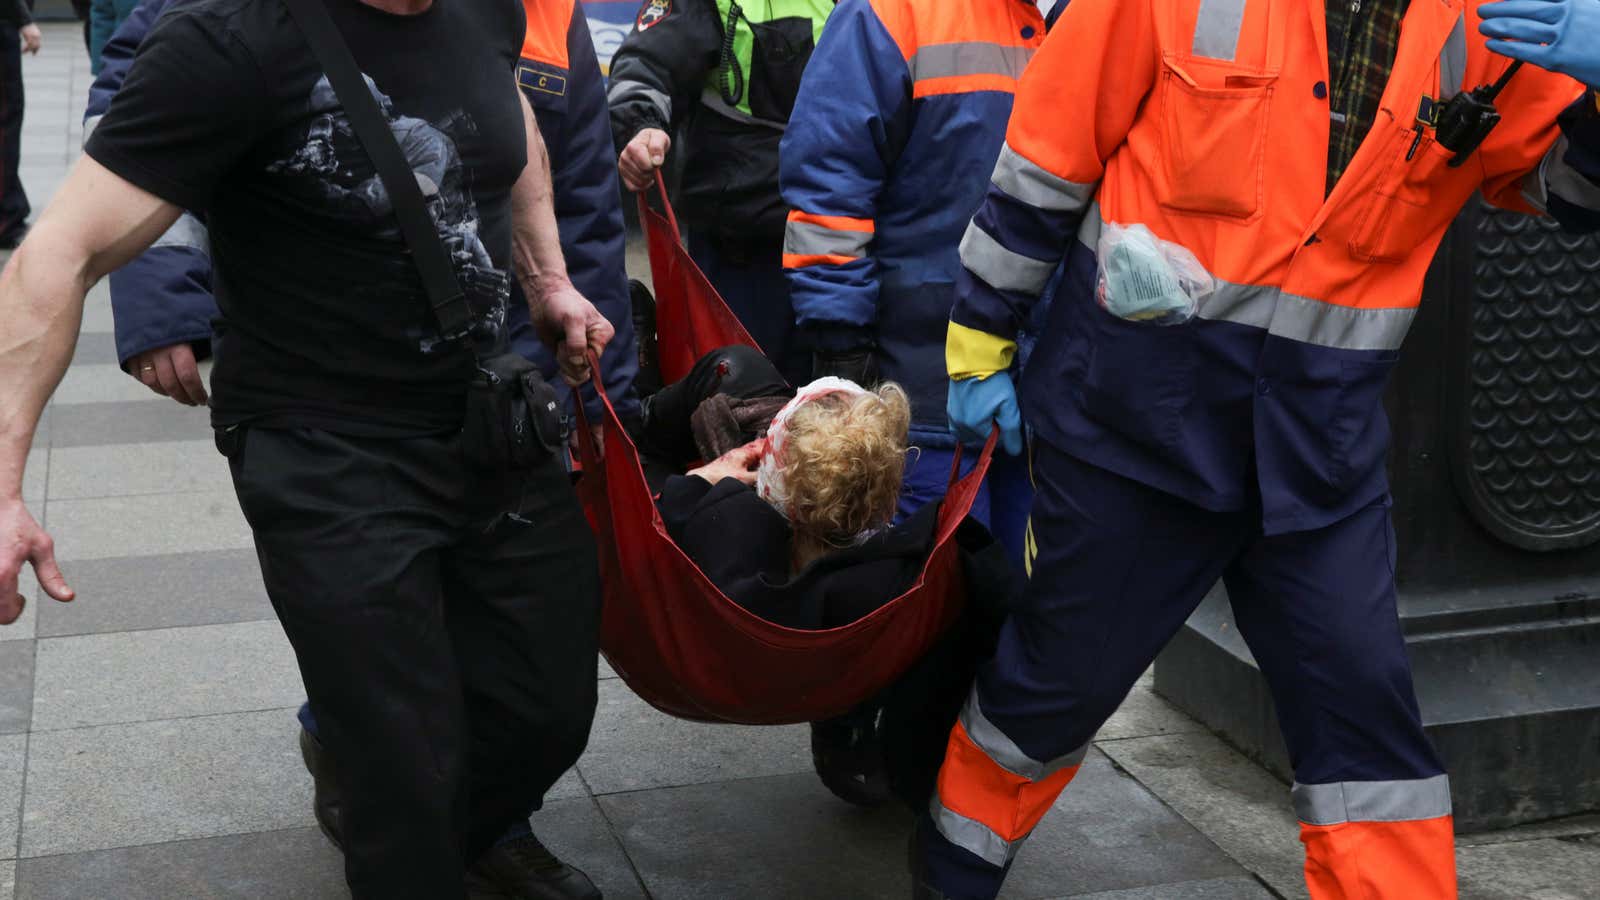 An injured person is helped by emergency services outside Sennaya Ploshchad metro station, following explosions in two train carriages at metro stations in St. Petersburg, Russia April 3, 2017. REUTERS/Anton Vaganov – RTX33UT9